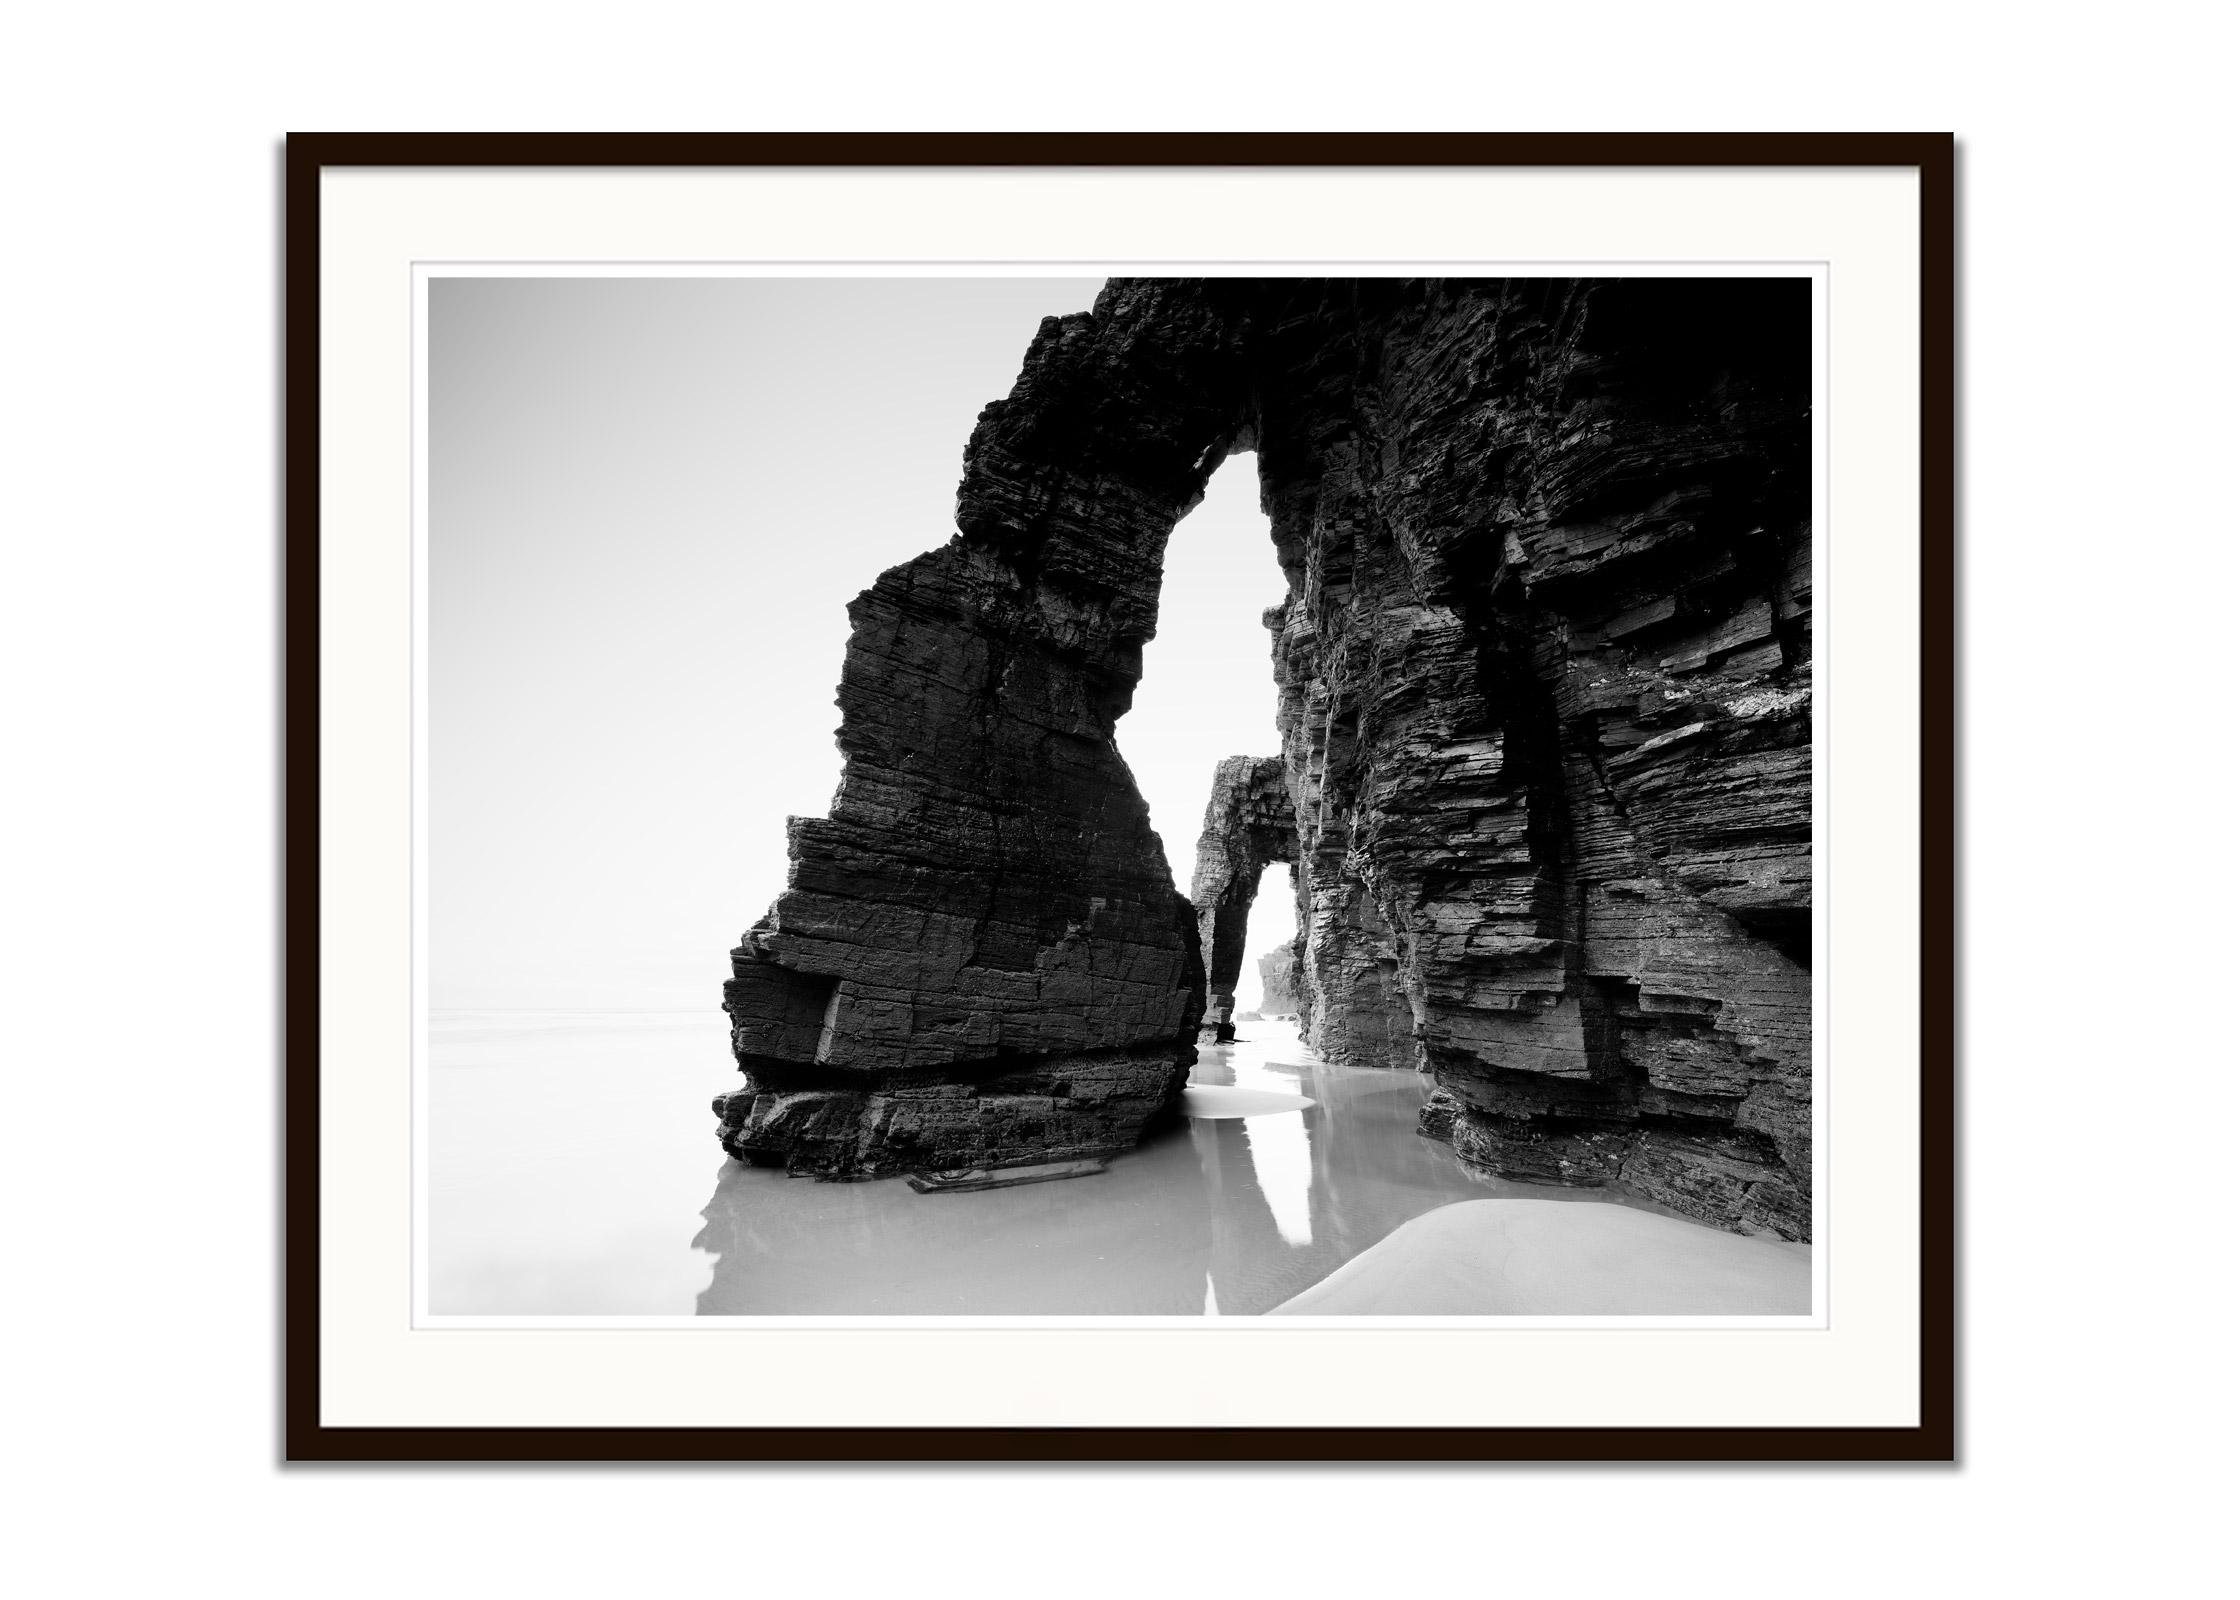 Black and white fine art landscape photography. Archival pigment ink print as part of a limited edition of 7. All Gerald Berghammer prints are made to order in limited editions on Hahnemuehle Photo Rag Baryta. Each print is stamped on the back and